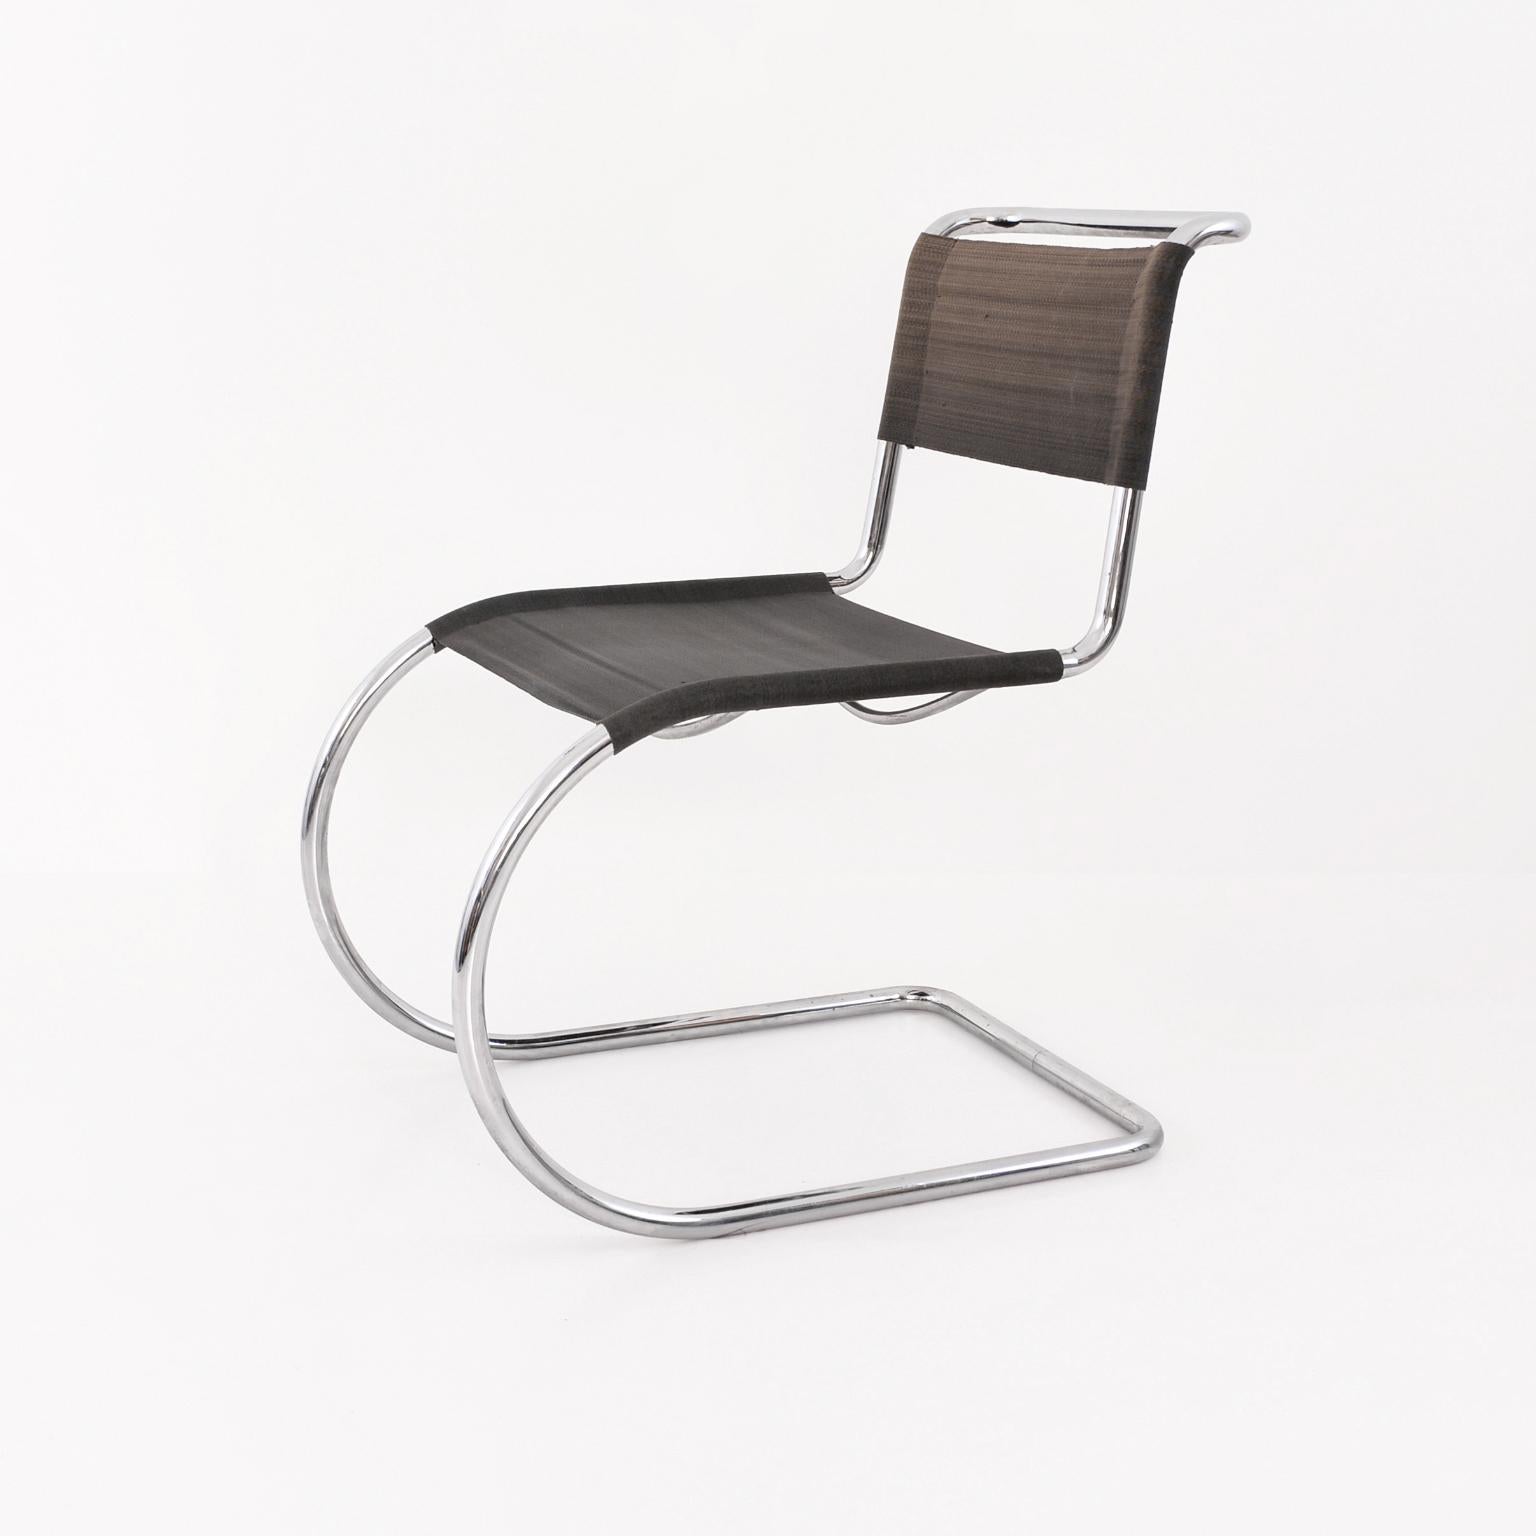 Bauhaus Ludwig Mies van der Rohe Weißenhof Mr 10 / Mr 533 Chairs Manufactured by Thonet For Sale